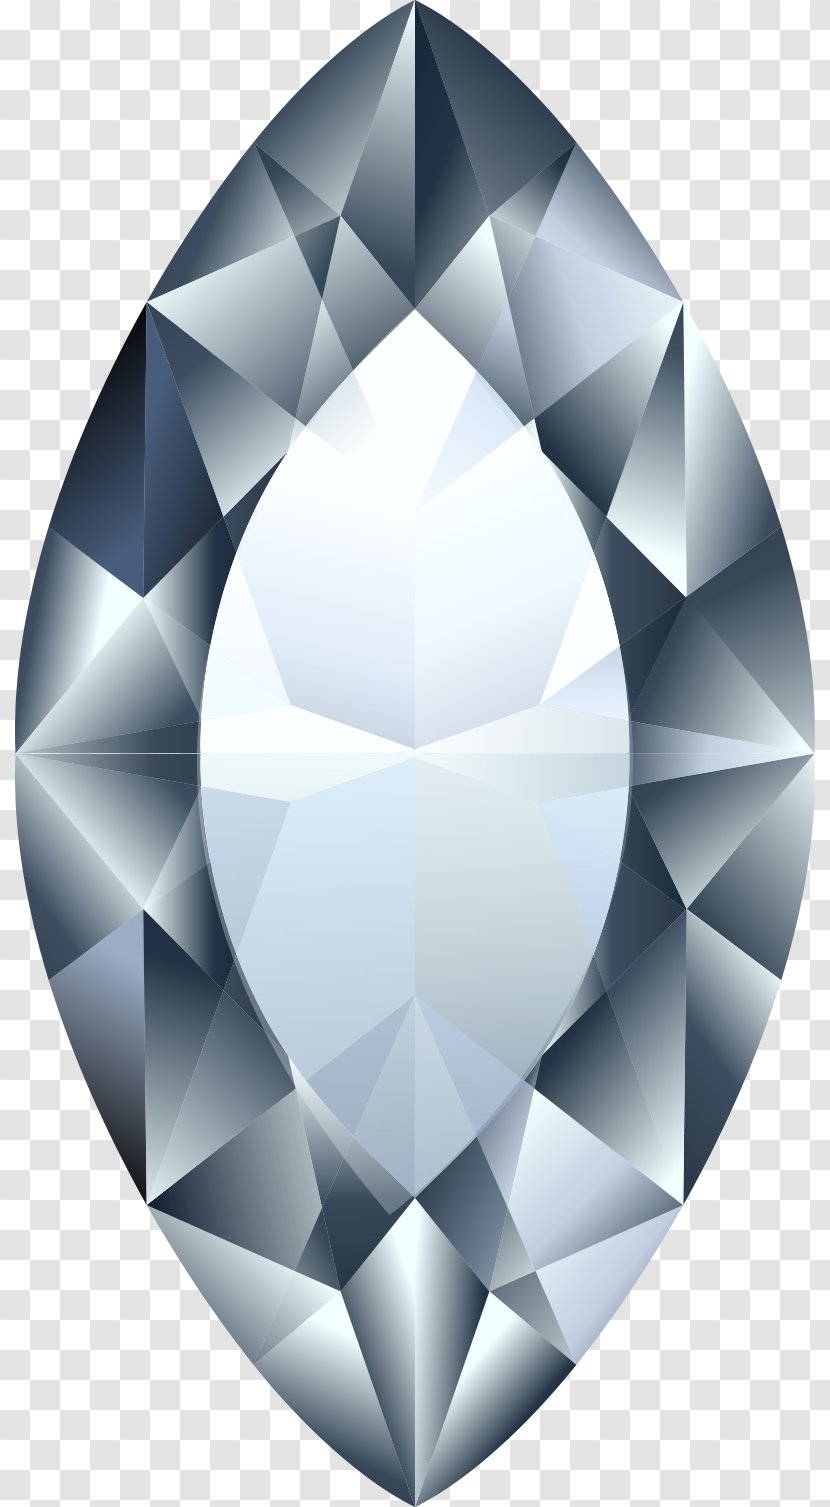 Diamond Cut - Vector Silver Oval Perspective Transparent PNG